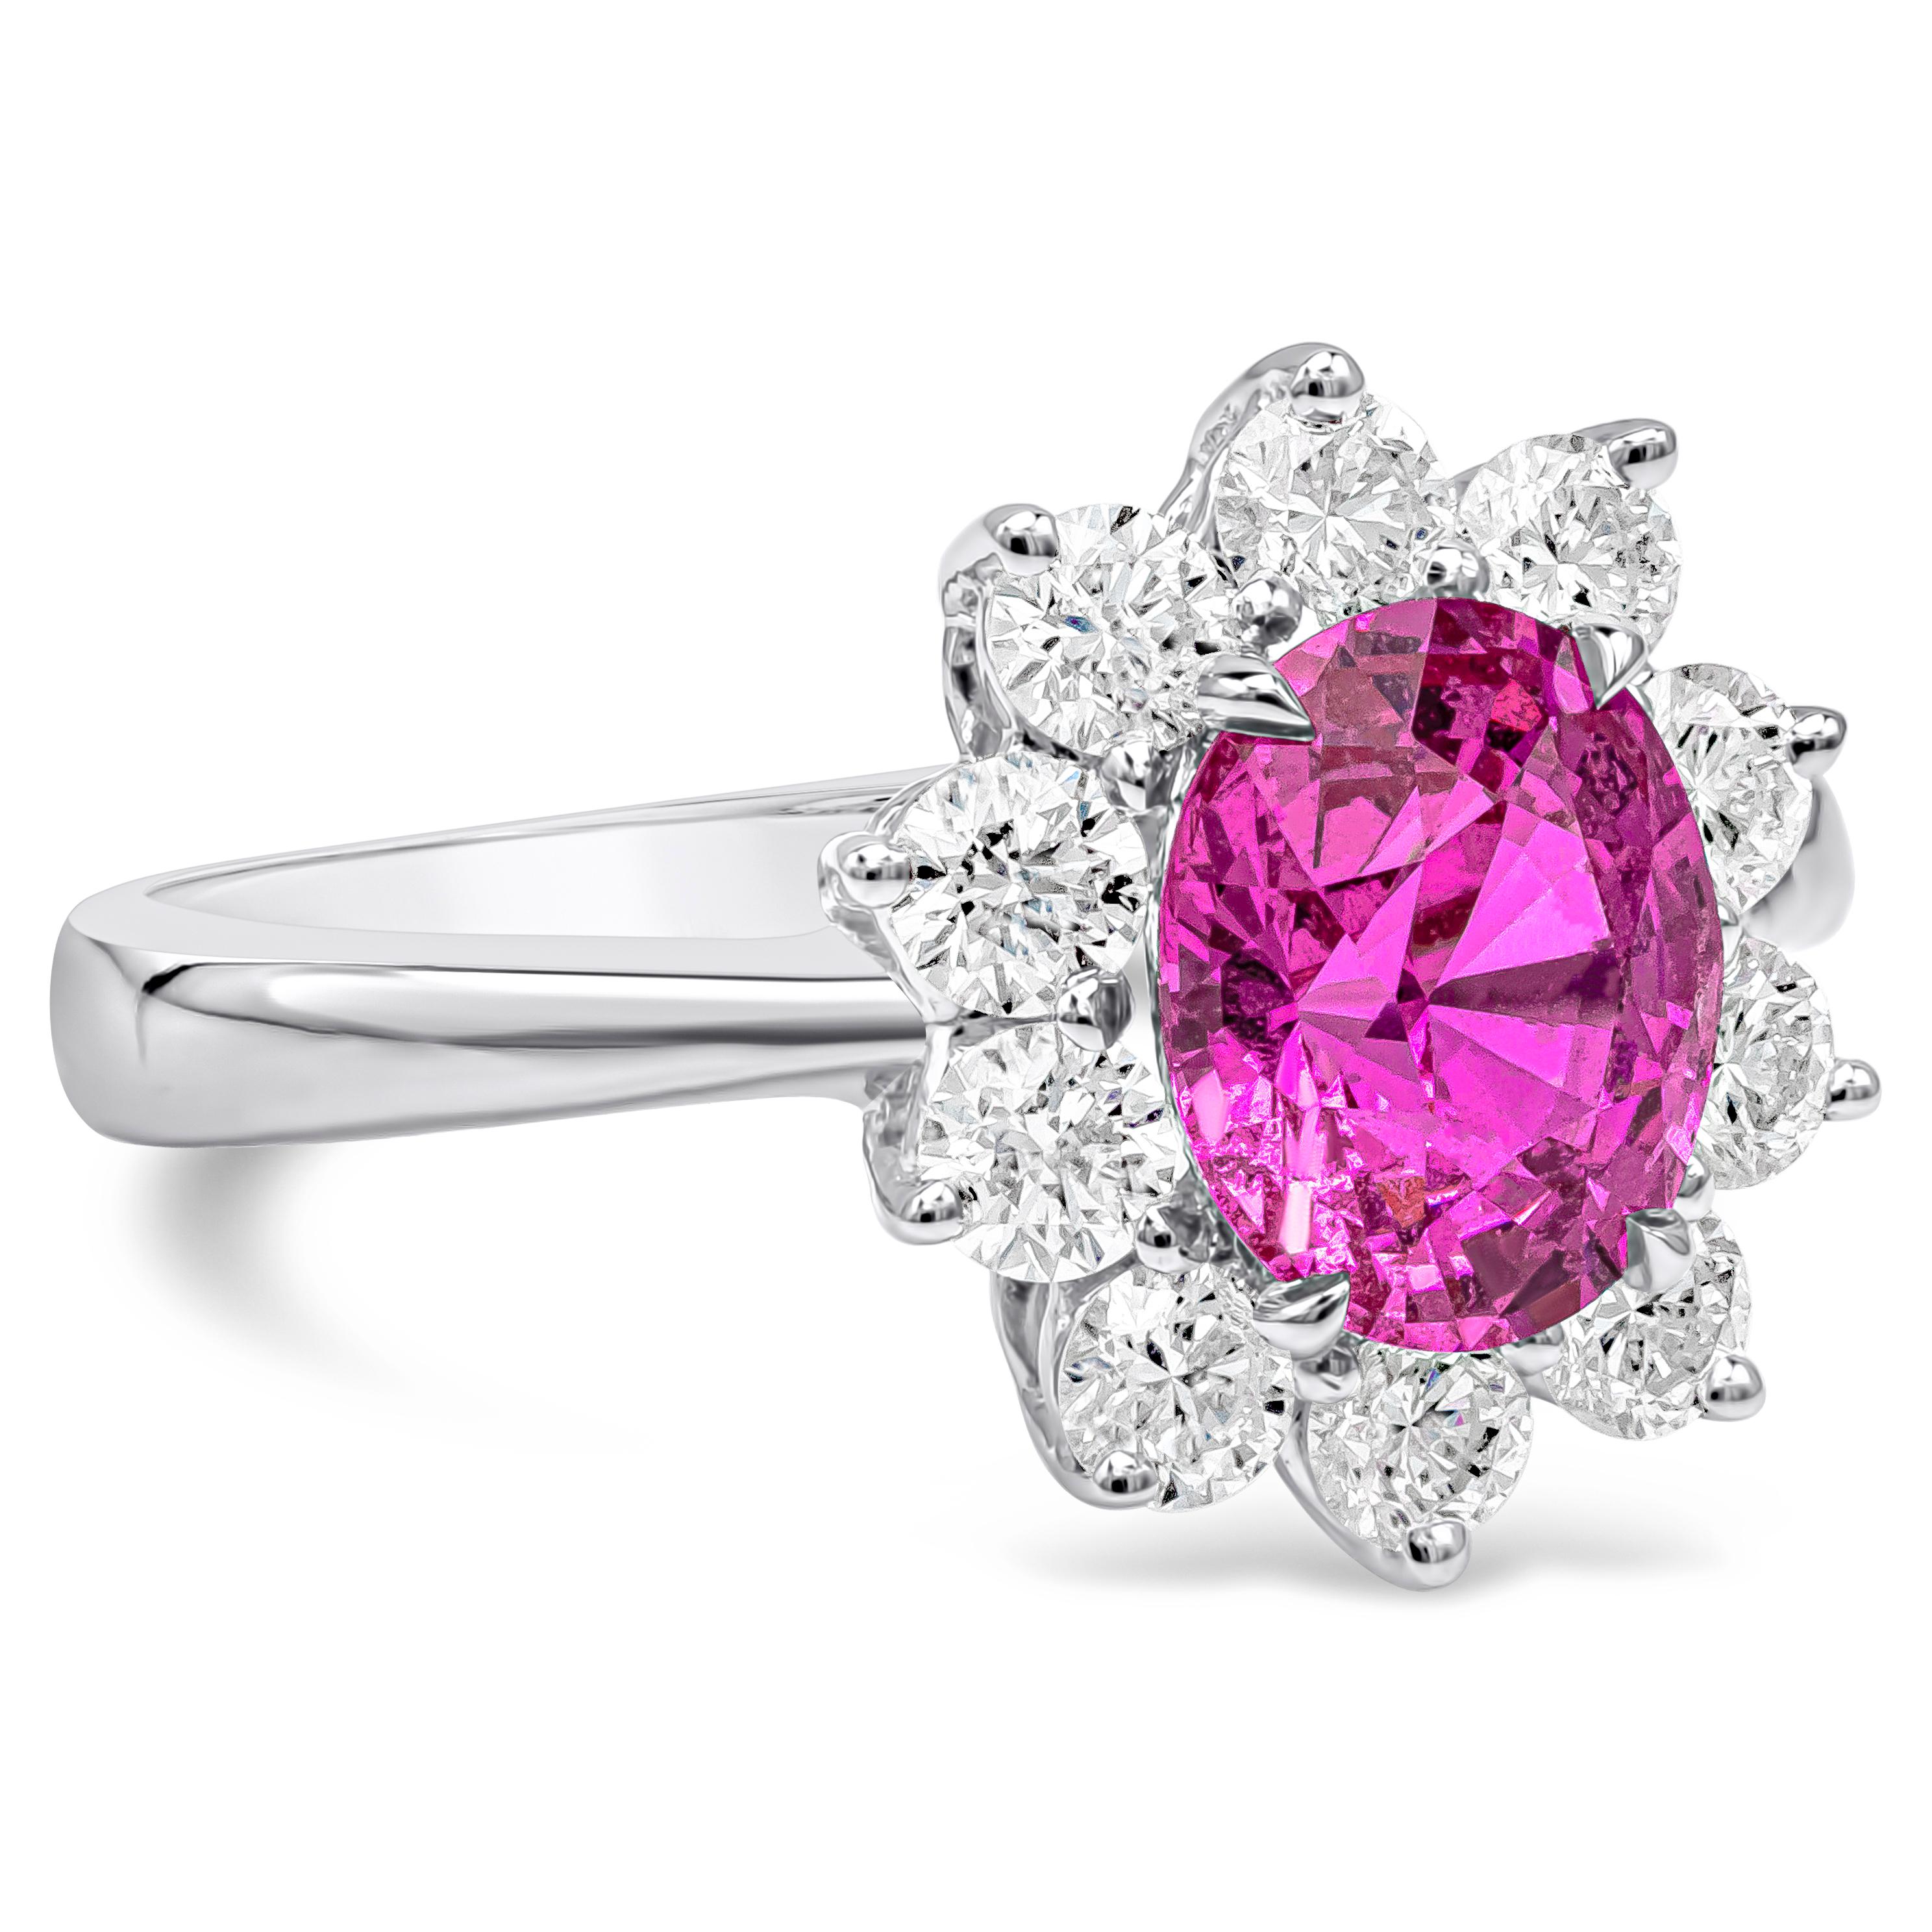 A lovely gemstone engagement ring style showcasing a oval cut pink sapphire weighing 1.89 carats total, elegantly surrounded by a row of brilliant round diamonds in a flower halo design. Diamonds weigh 0.82 carats. Made in 18K White Gold.

Roman